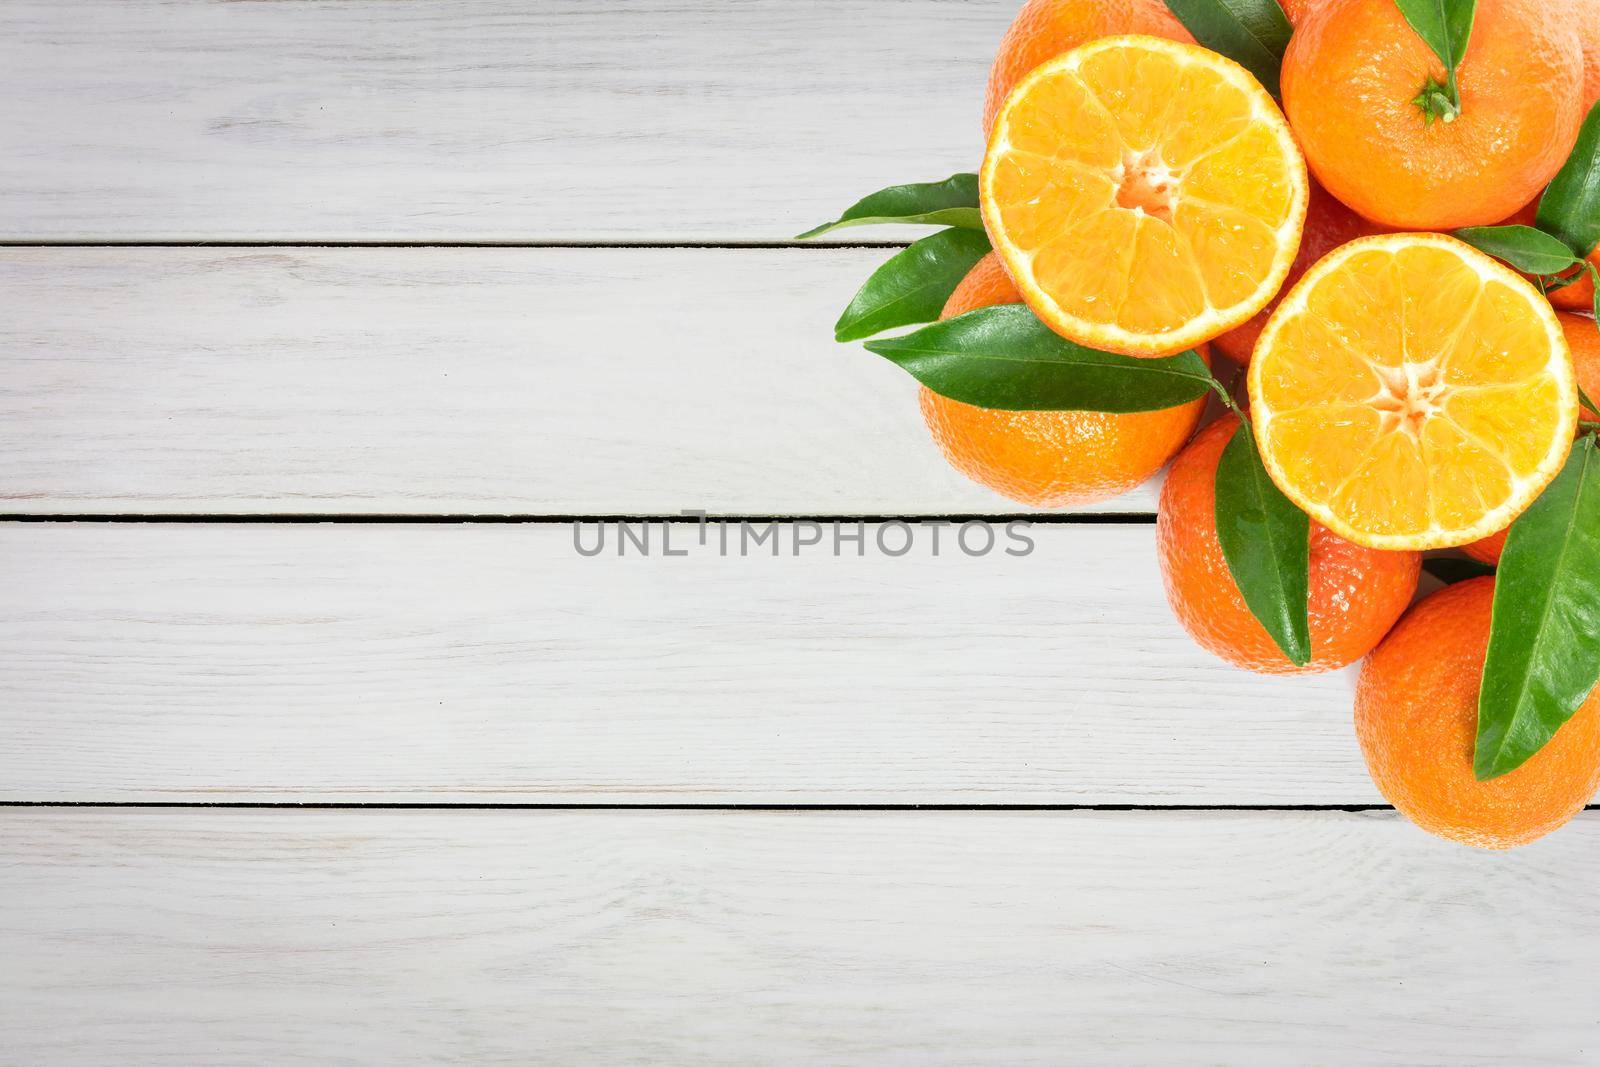 Tropical fruit composition - group of fresh oranges or tangerines  on a wooden vintage table (copy space)